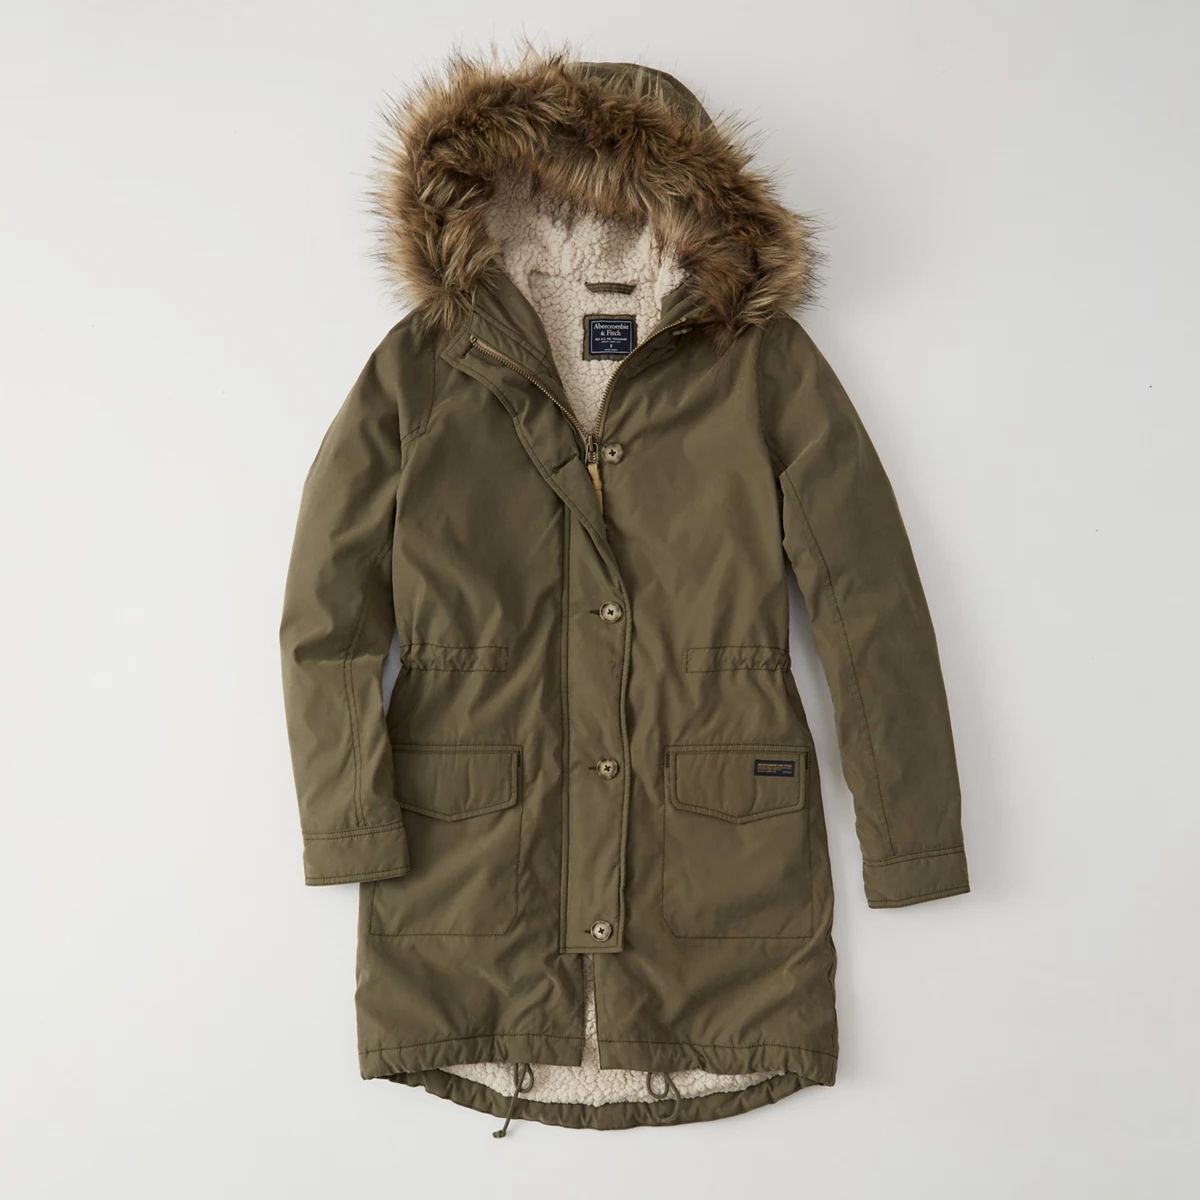 Sherpa Military Parka | Abercrombie & Fitch US & UK